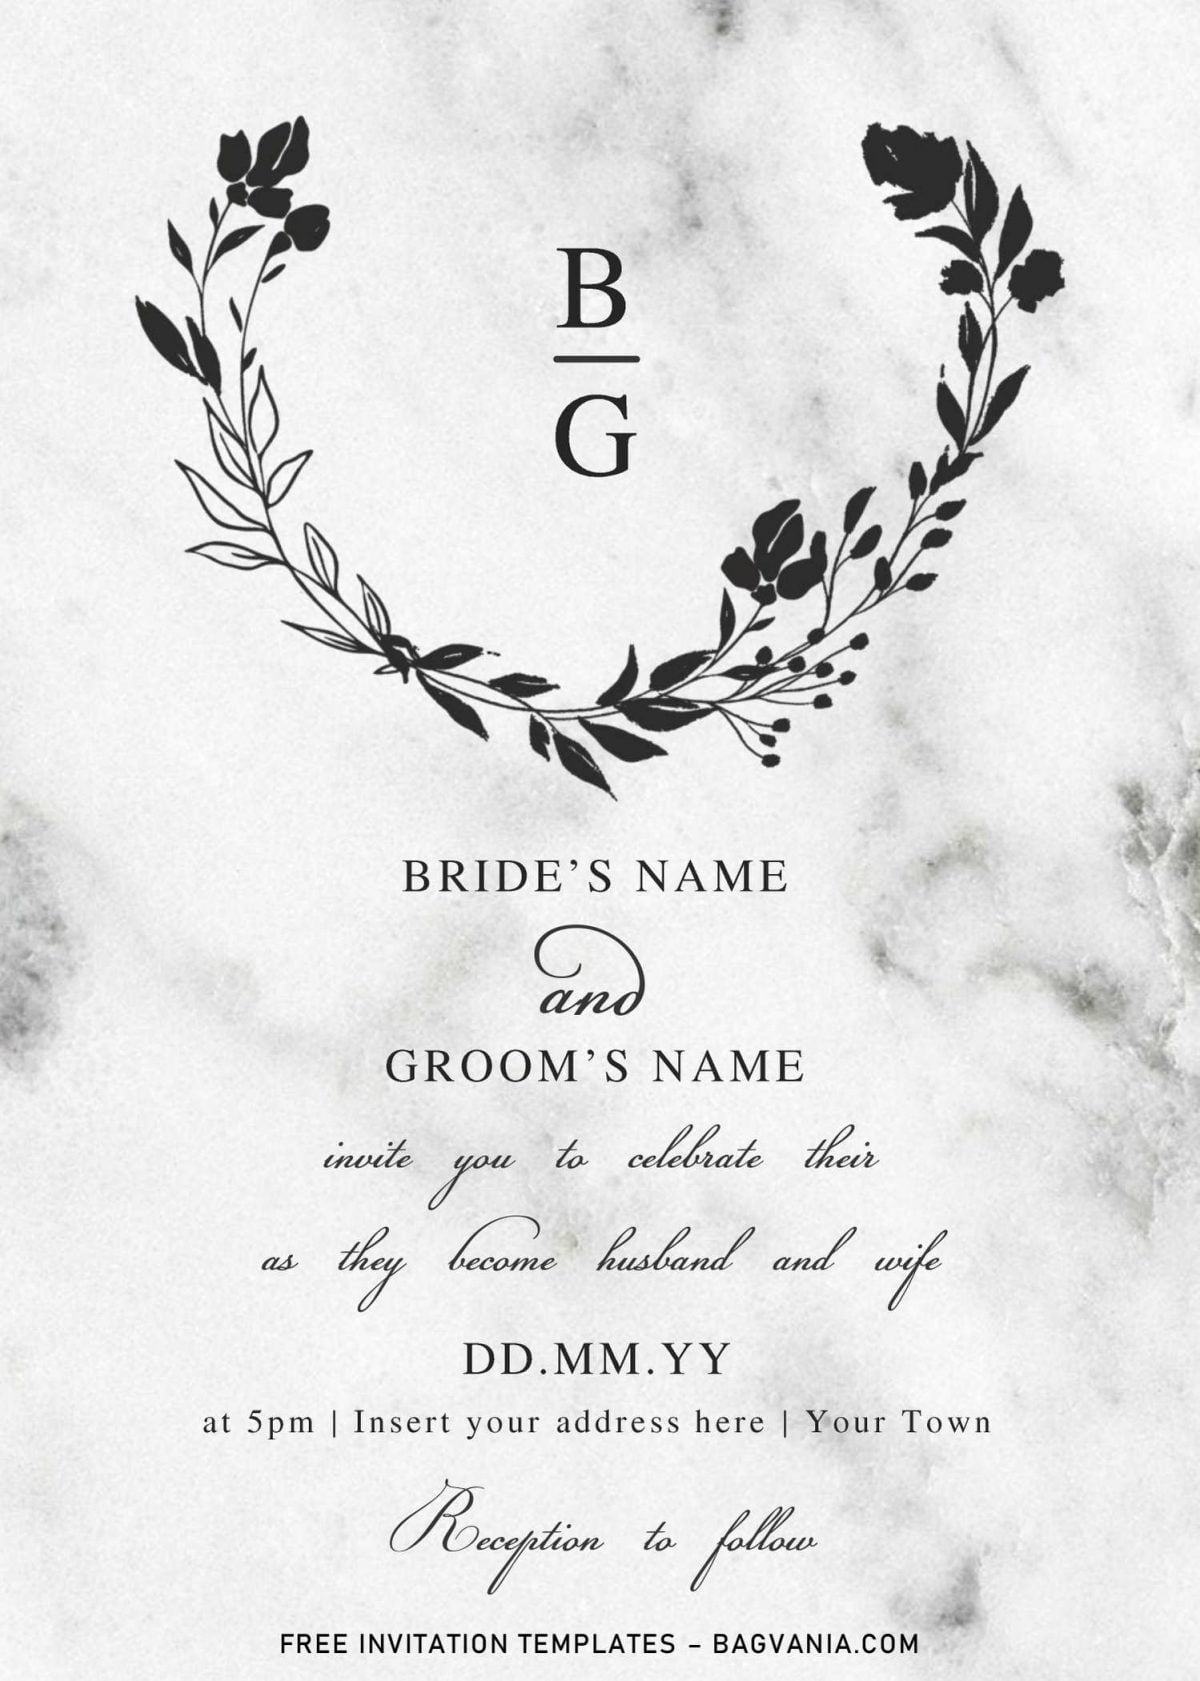 Free Floral Monogram Wedding Invitation Templates For Word and has white & black marble background